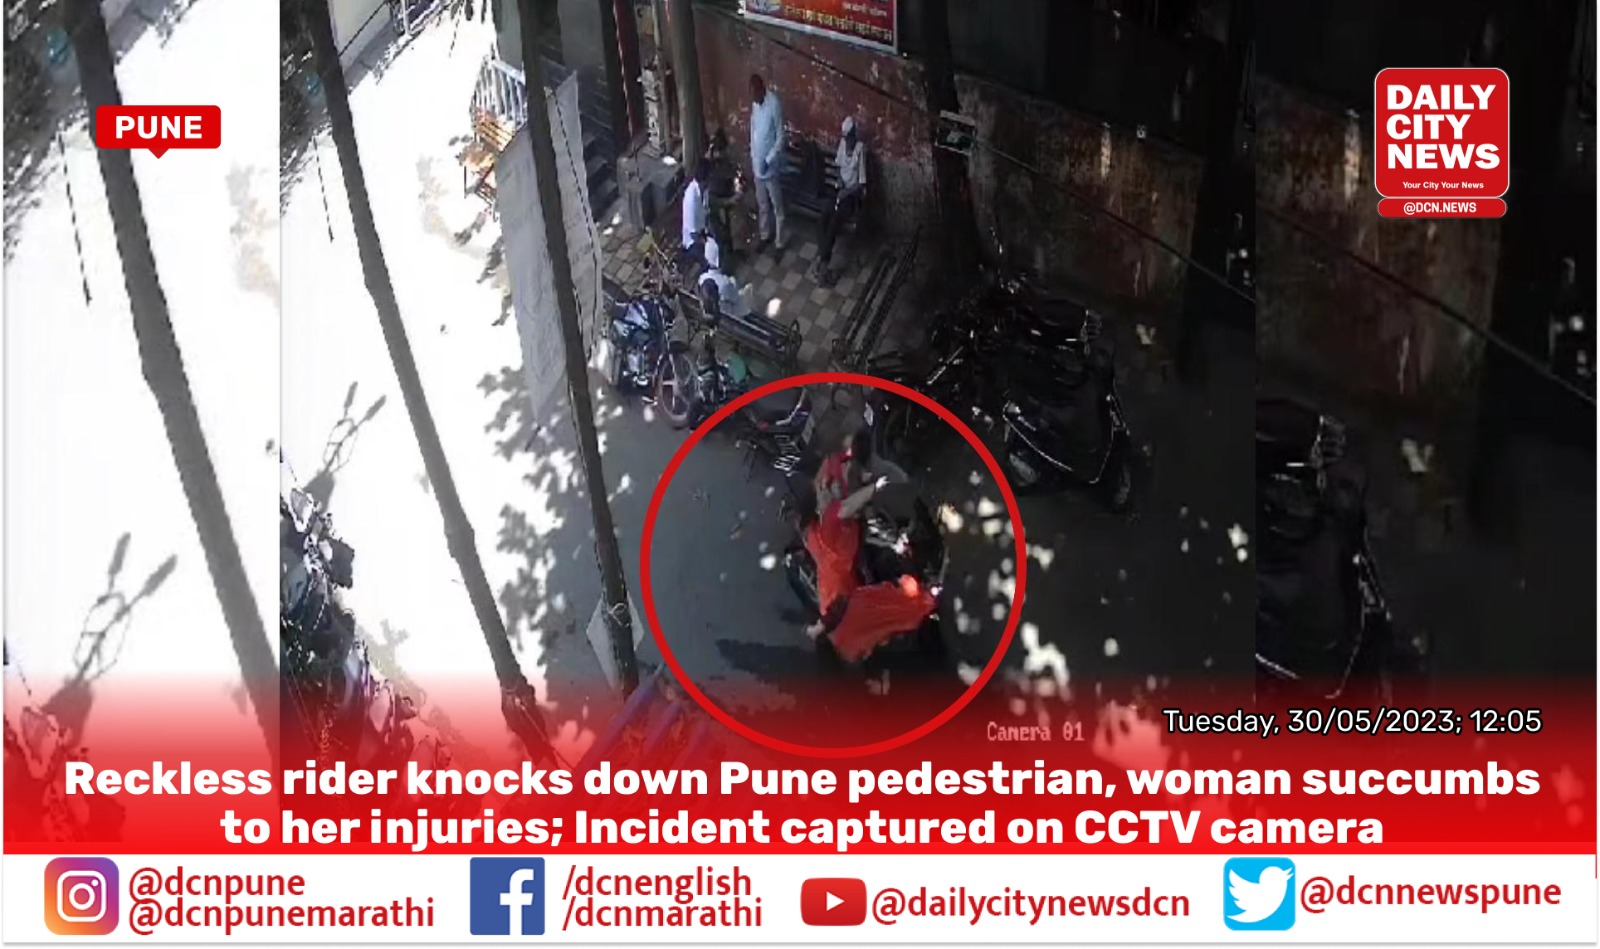 Reckless rider knocks down Pune pedestrian, woman succumbs to her injuries; Incident captured on CCTV camera